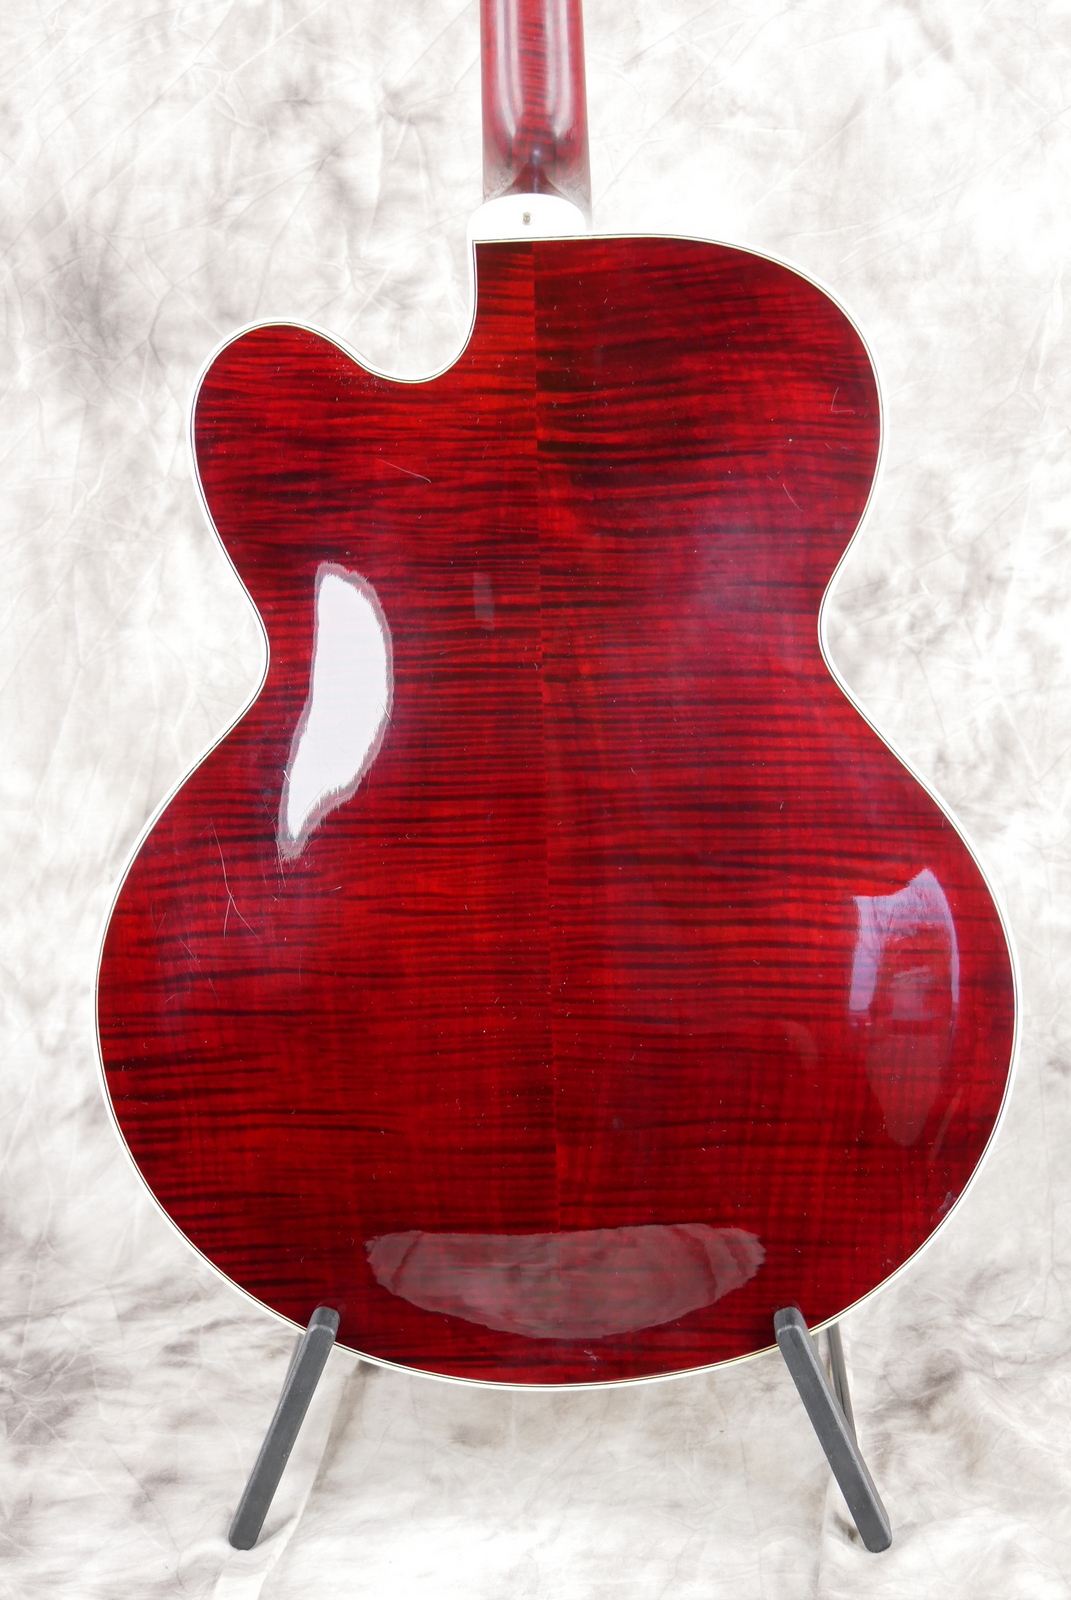 Gibson_L_5_Wes_Montgomery_USA_wine_red_1998-004.JPG